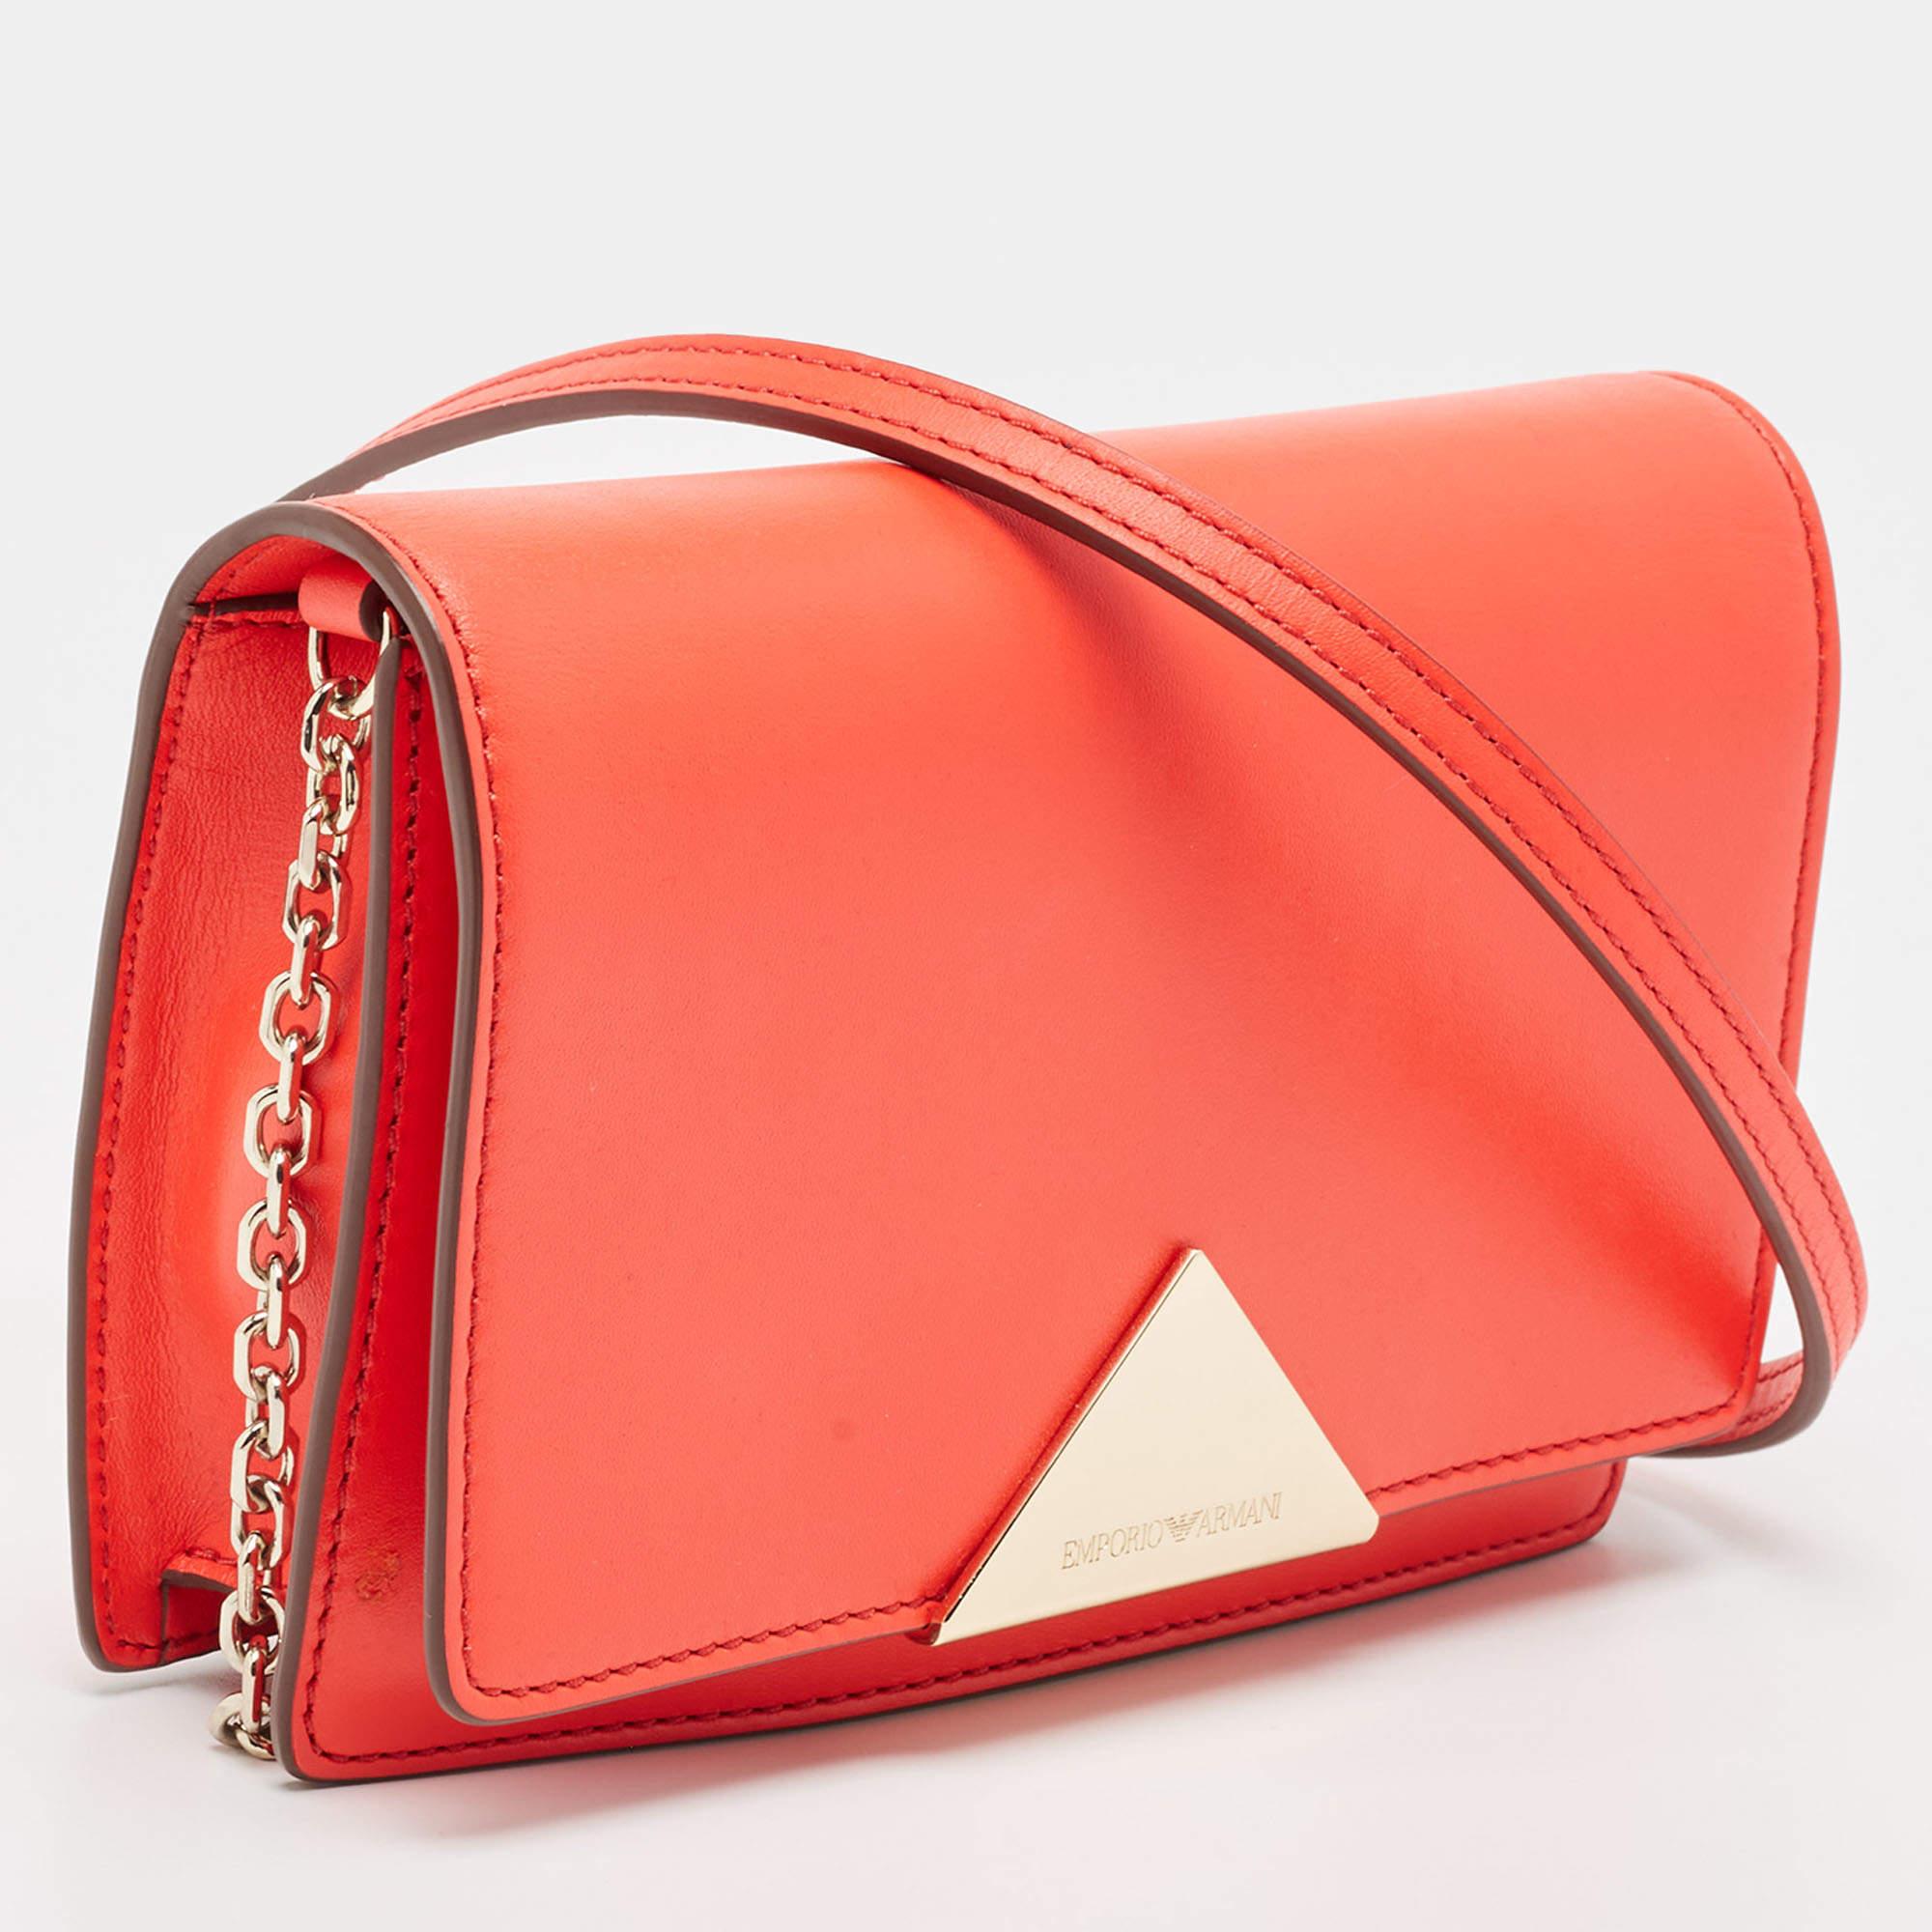 Emporio Armani Neon Red Leather Flap Crossbody Bag For Sale 7